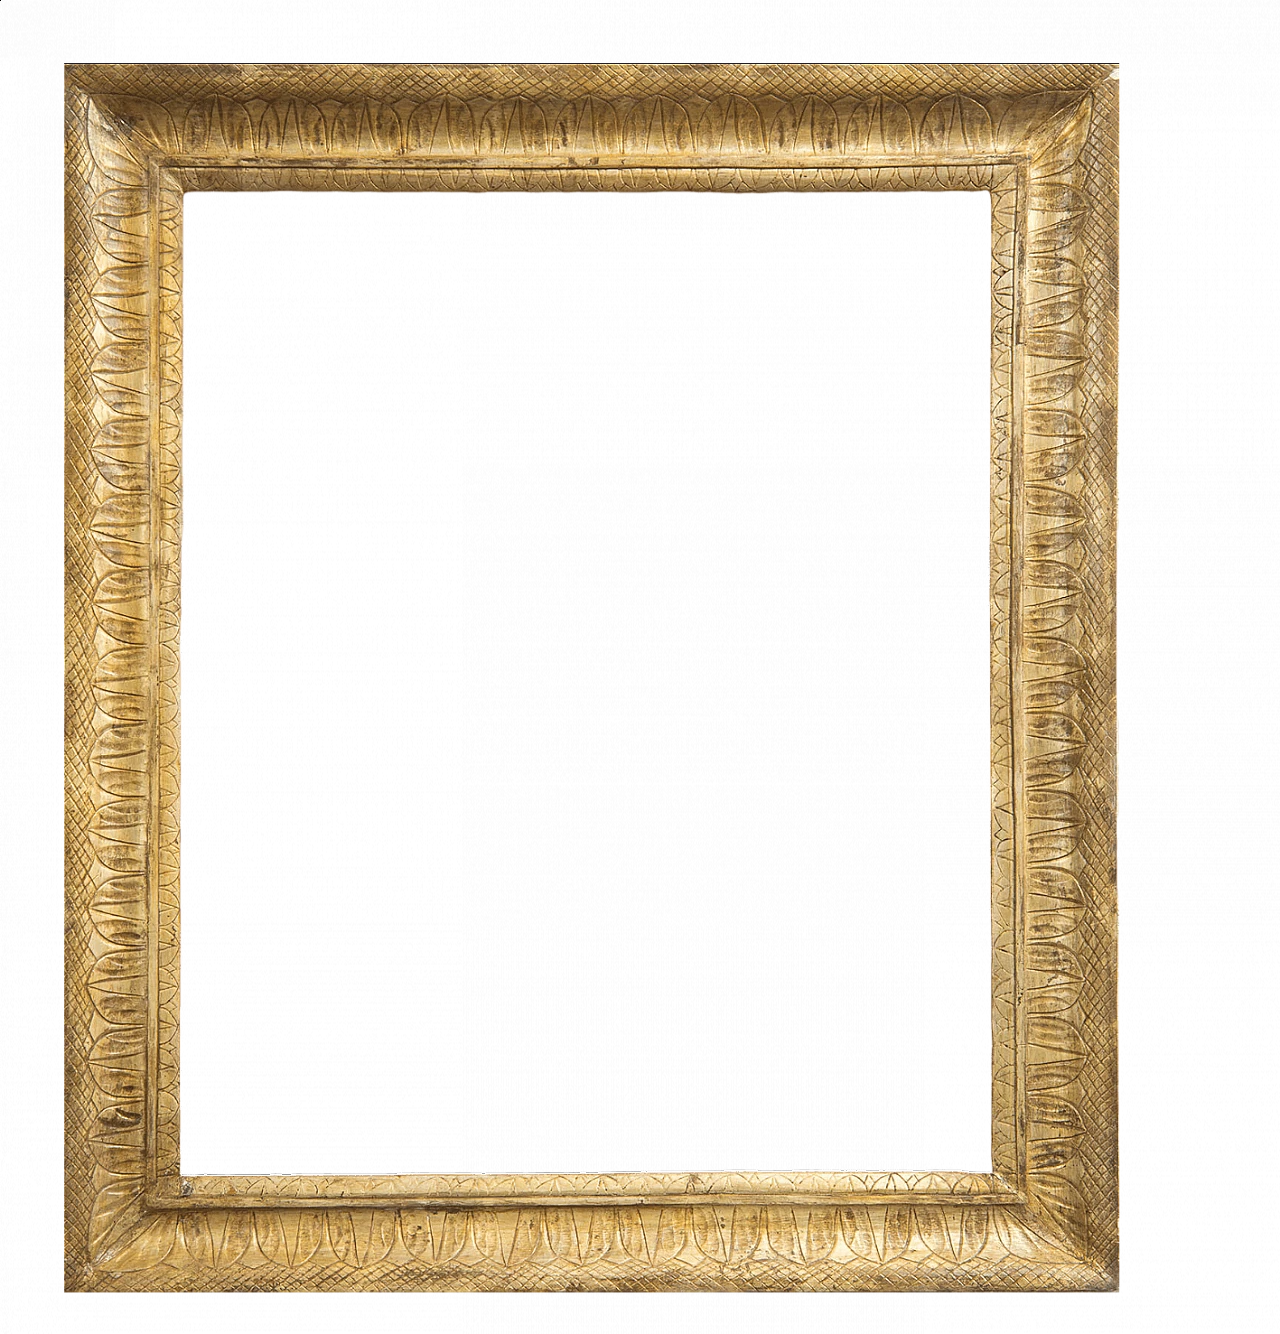 Empire Neapolitan gilded wood frame, early 19th century 4